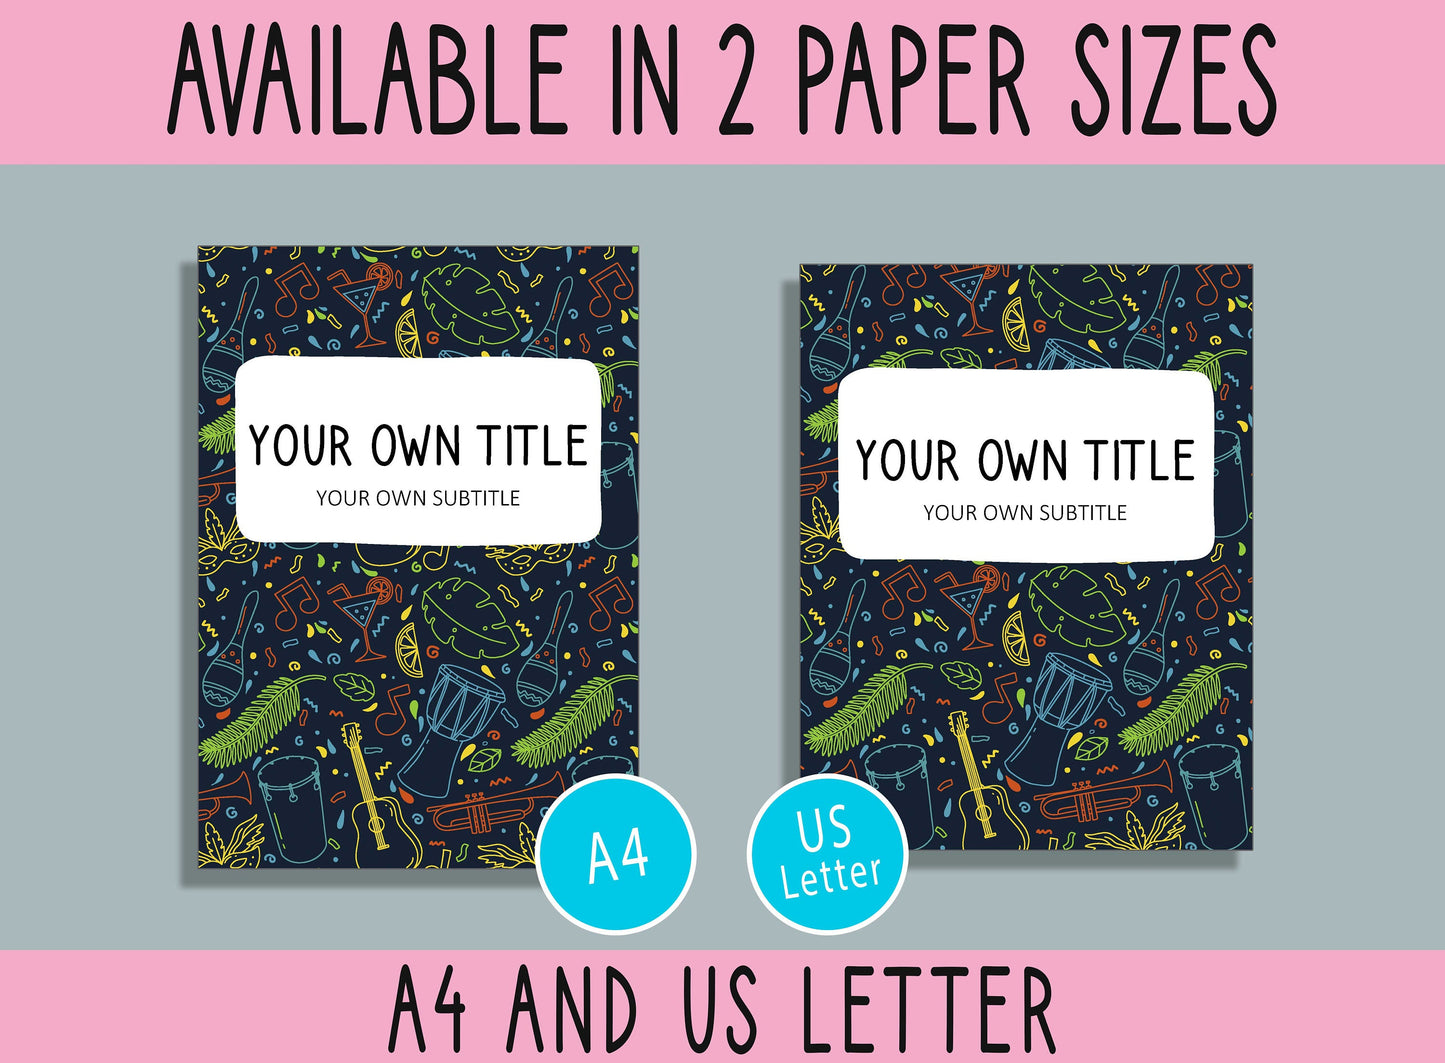 10 Editable Autumn Binder Covers, Includes 1, 1.5, 2" Spines, Available in A4 & US Letter, Editing with PowerPoint or PDF Reader